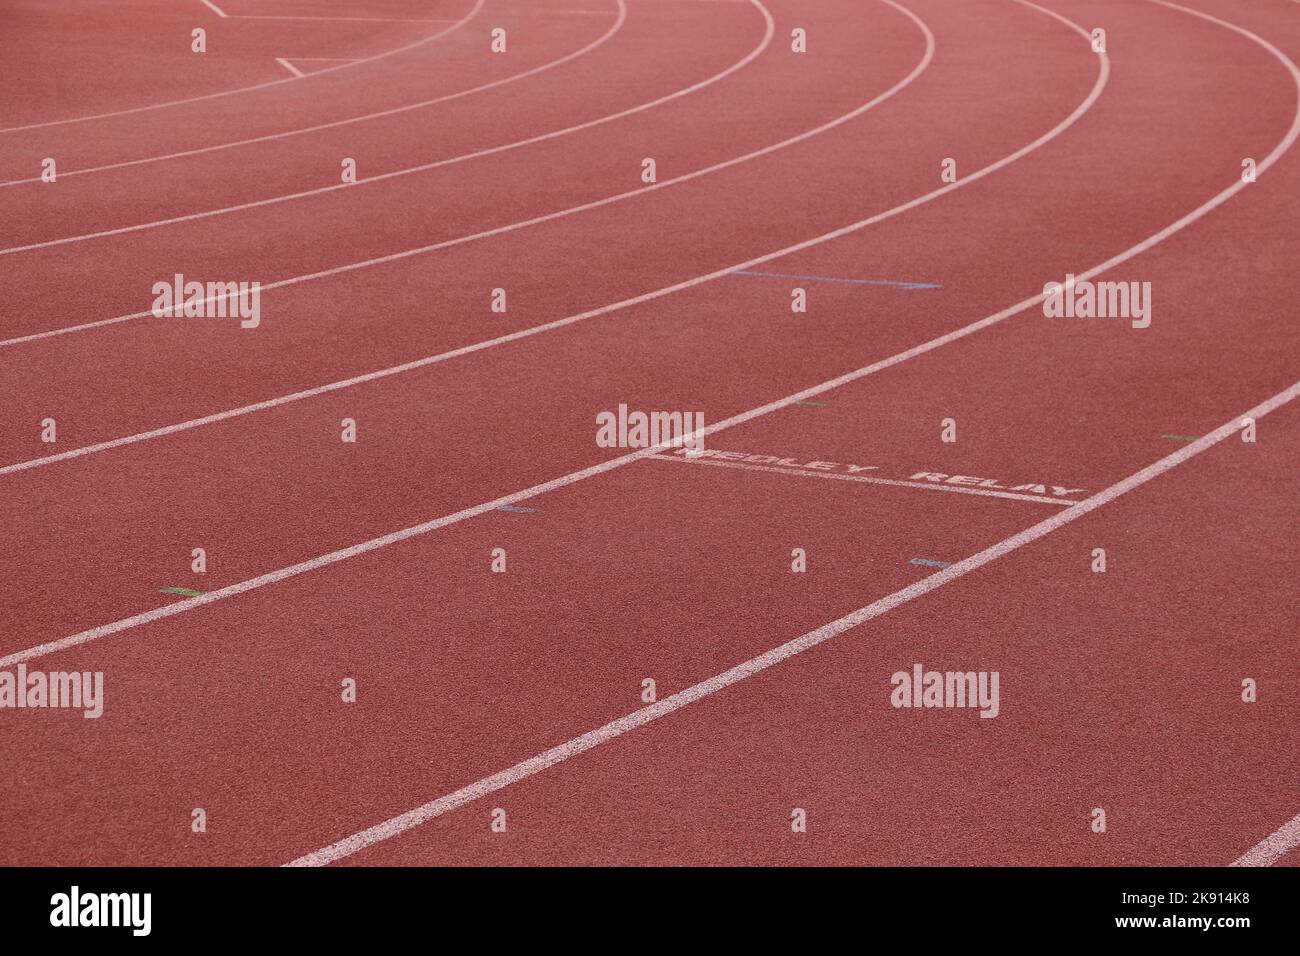 White lines forming lanes of an athletics track made of red rubber Stock Photo